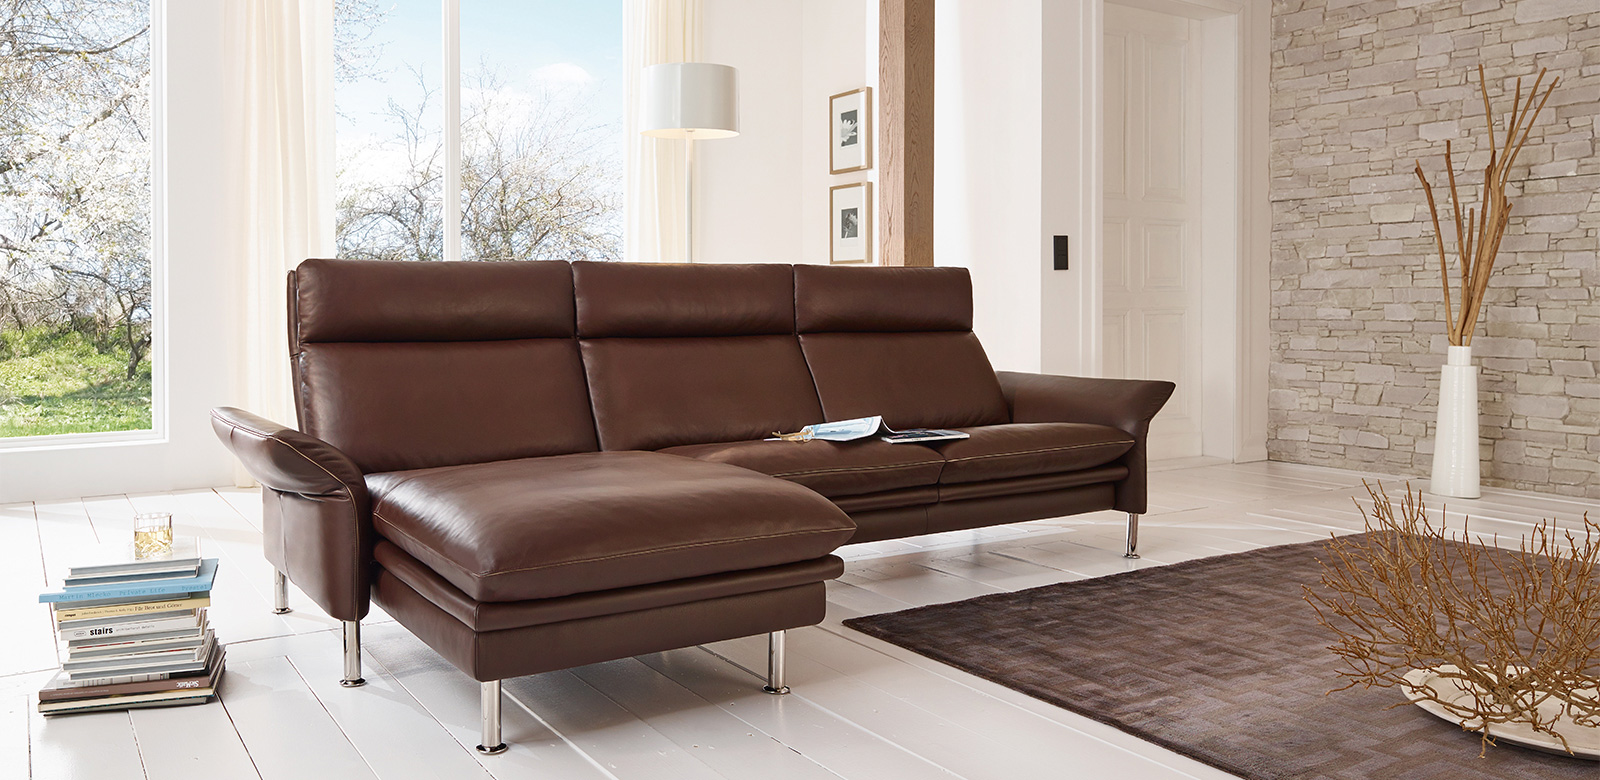 The accentuation of the cushion look on this fine leather sofa is a promise of the highest seating comfort. The softness of the upholstery goes hand in hand with very delicate lines, which are evident in all elements to perfection. In all details - from the slender feet to the armrests that fold in at the sides to the backrest - this leather sofa reveals Erpo's sense of lightness and elegance in couch sets to a special degree.